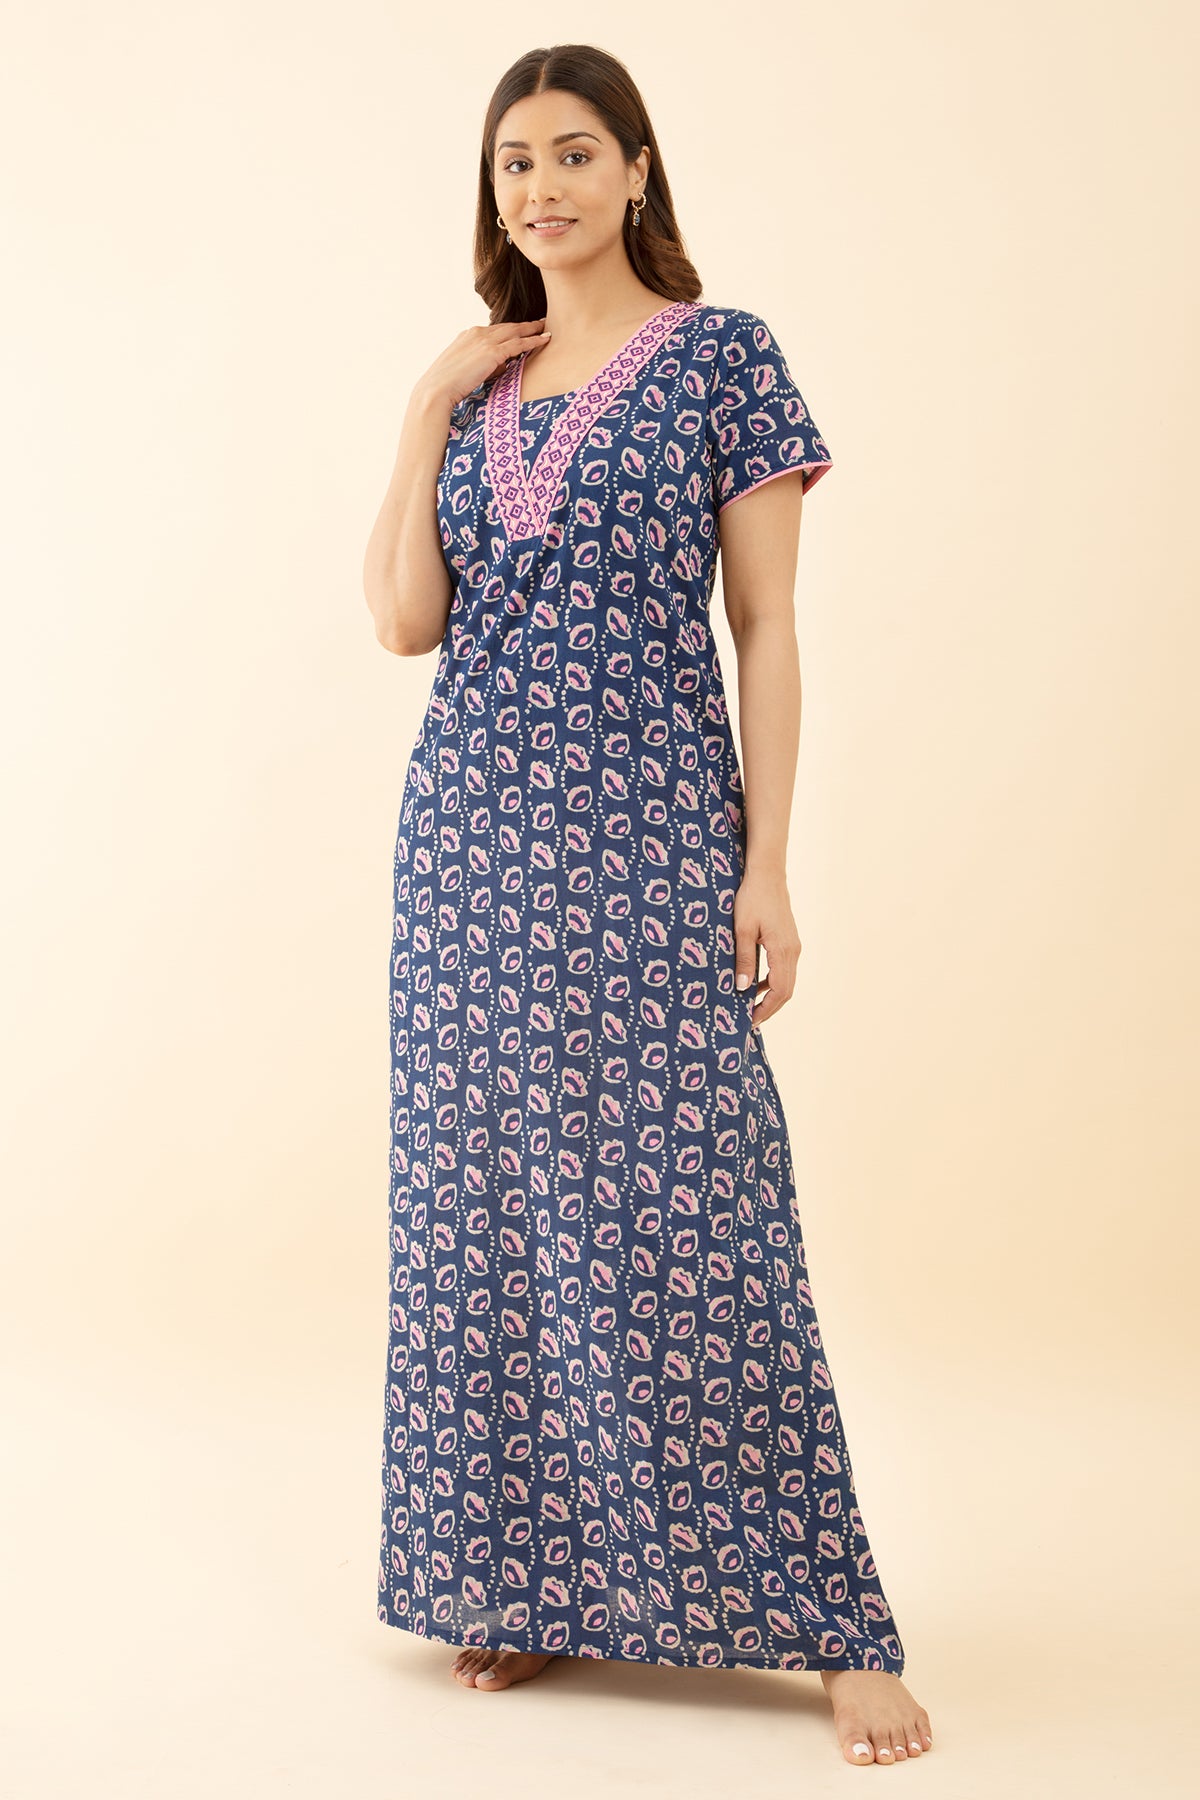 Blue Floral Nighty with Printed Style